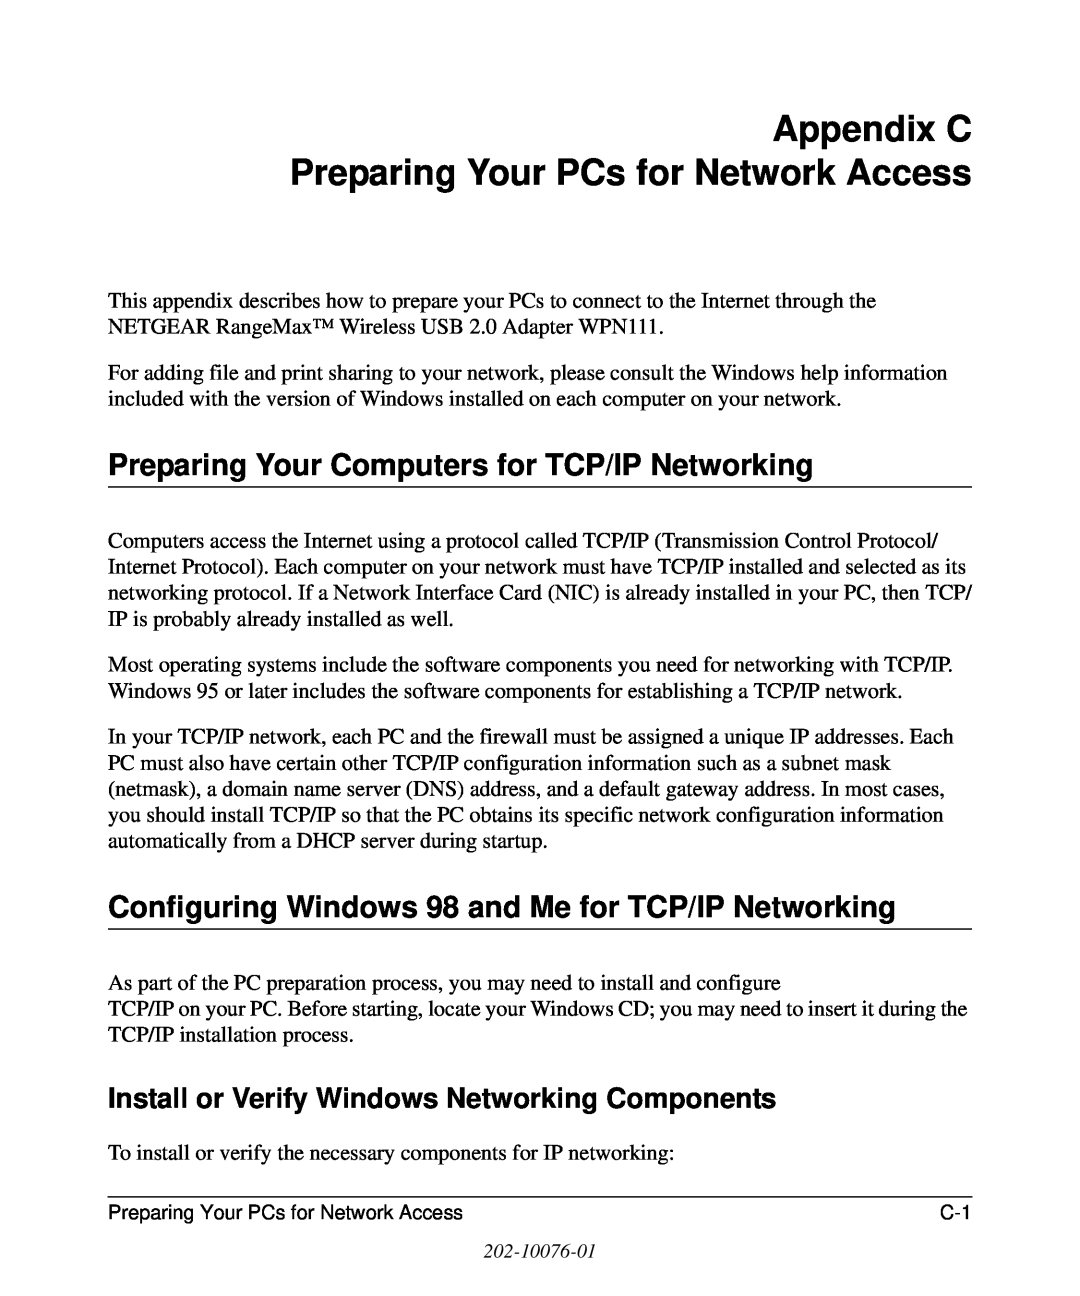 NETGEAR WPN111 user manual Appendix C Preparing Your PCs for Network Access, Preparing Your Computers for TCP/IP Networking 